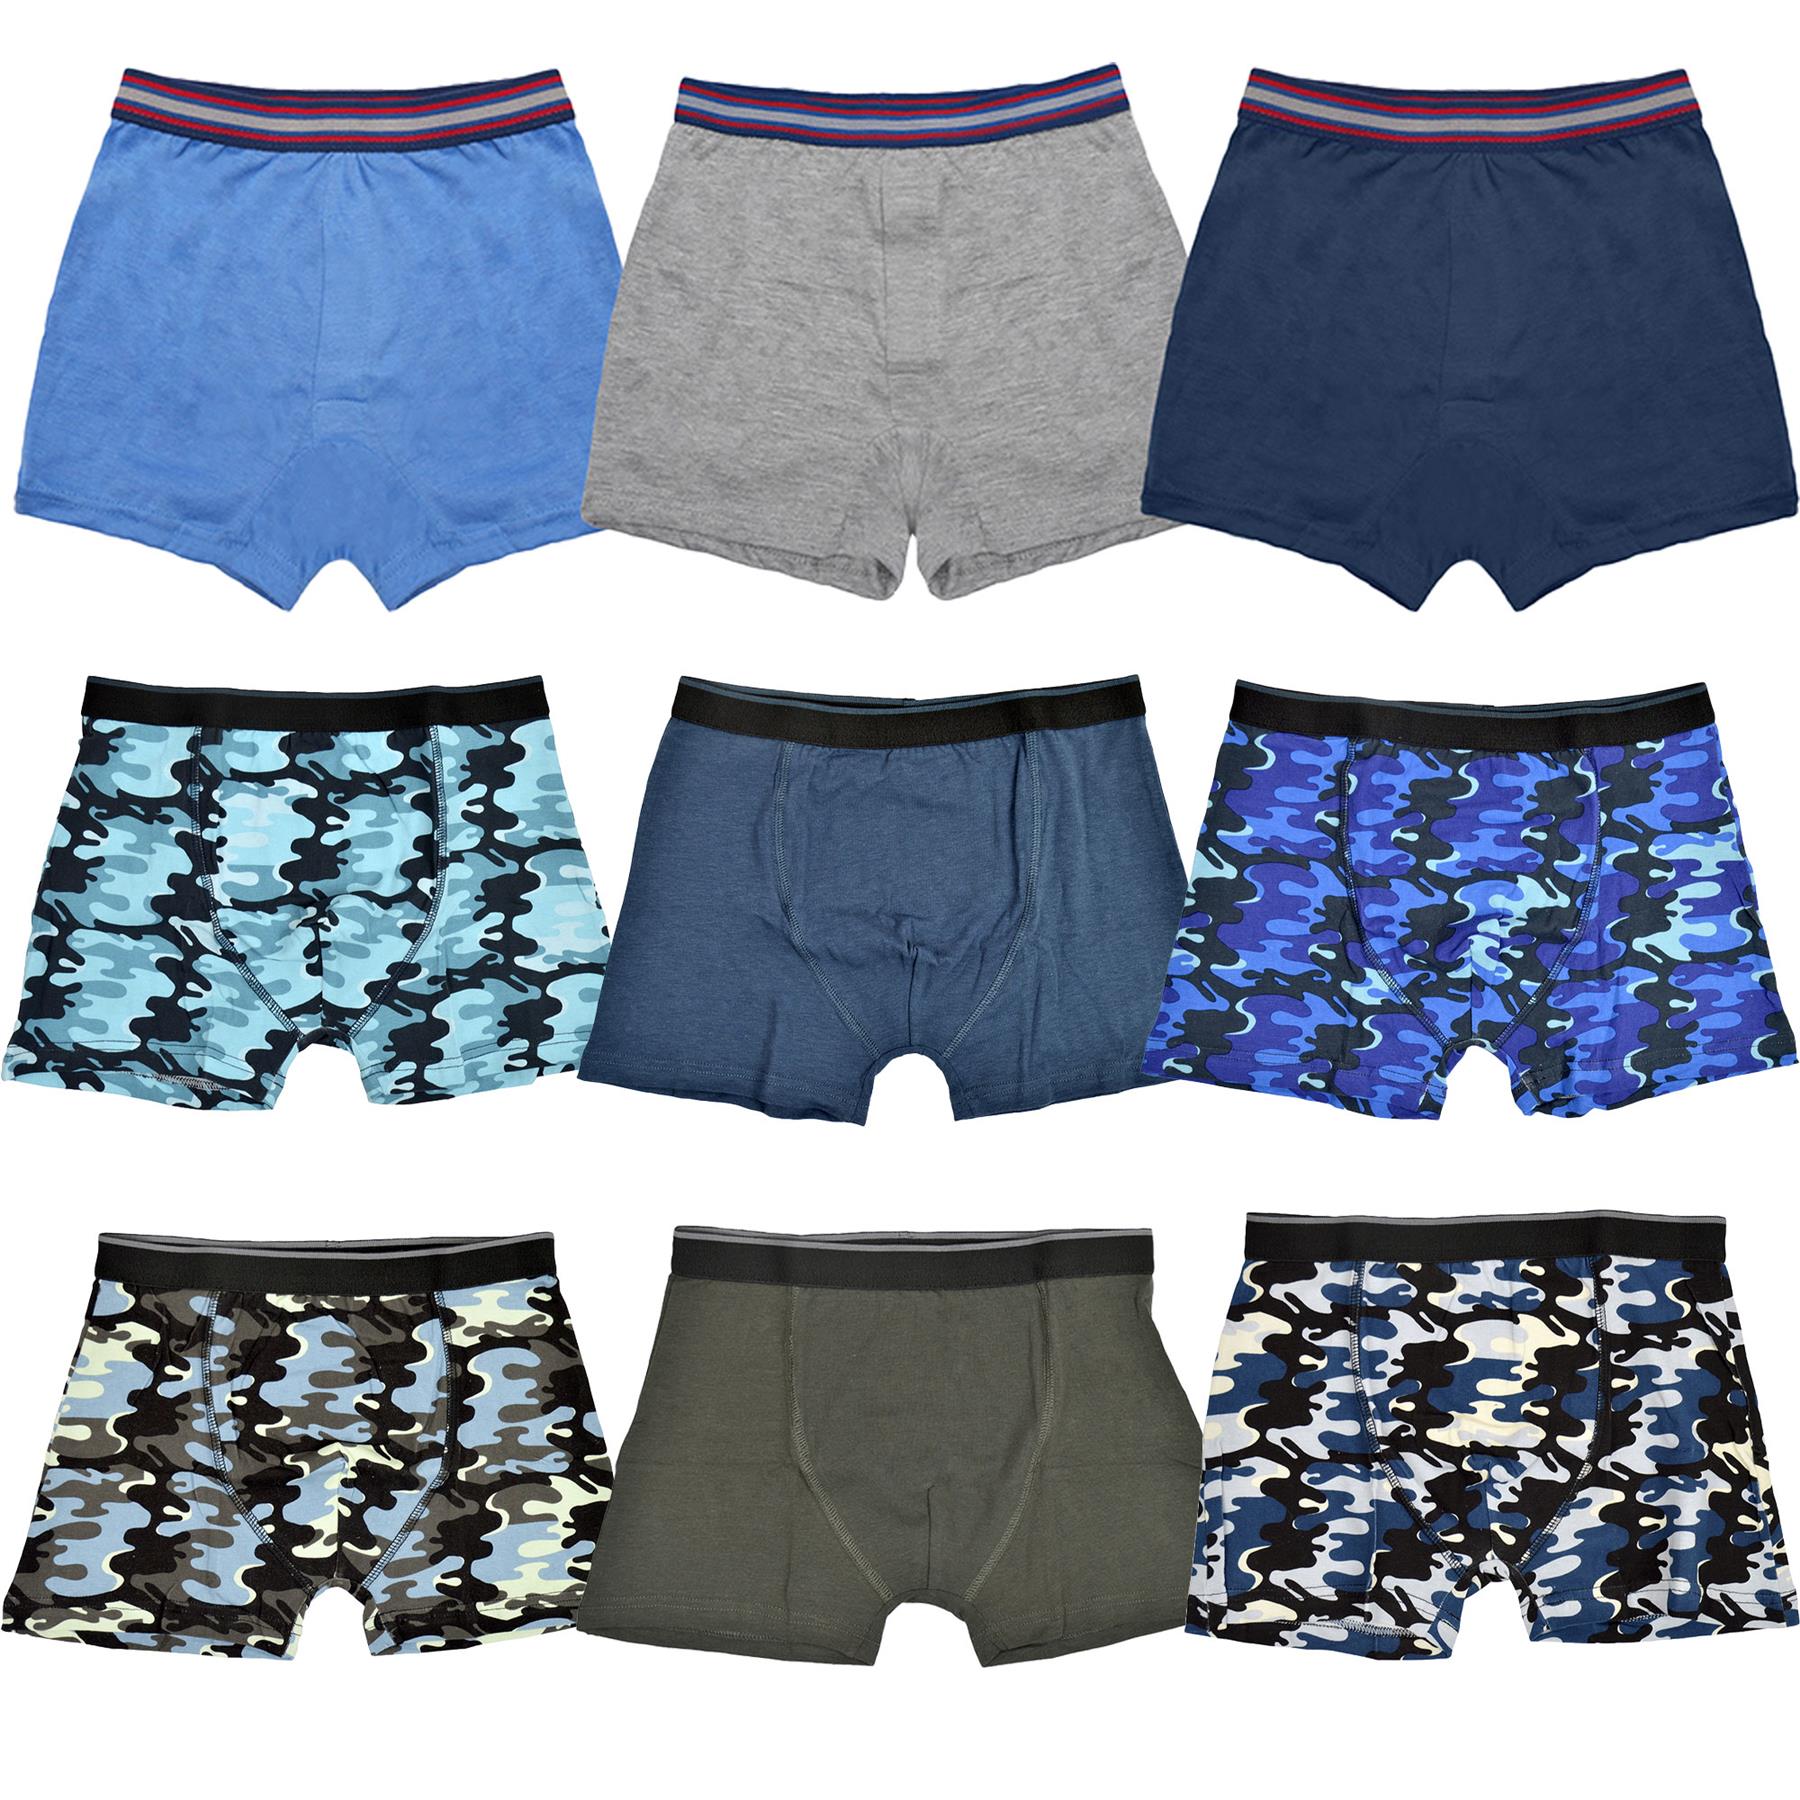 A2Z 4 Kids Boys Boxer Pack Of 3 Plain Camouflage Knickers Cotton Mix Underpants